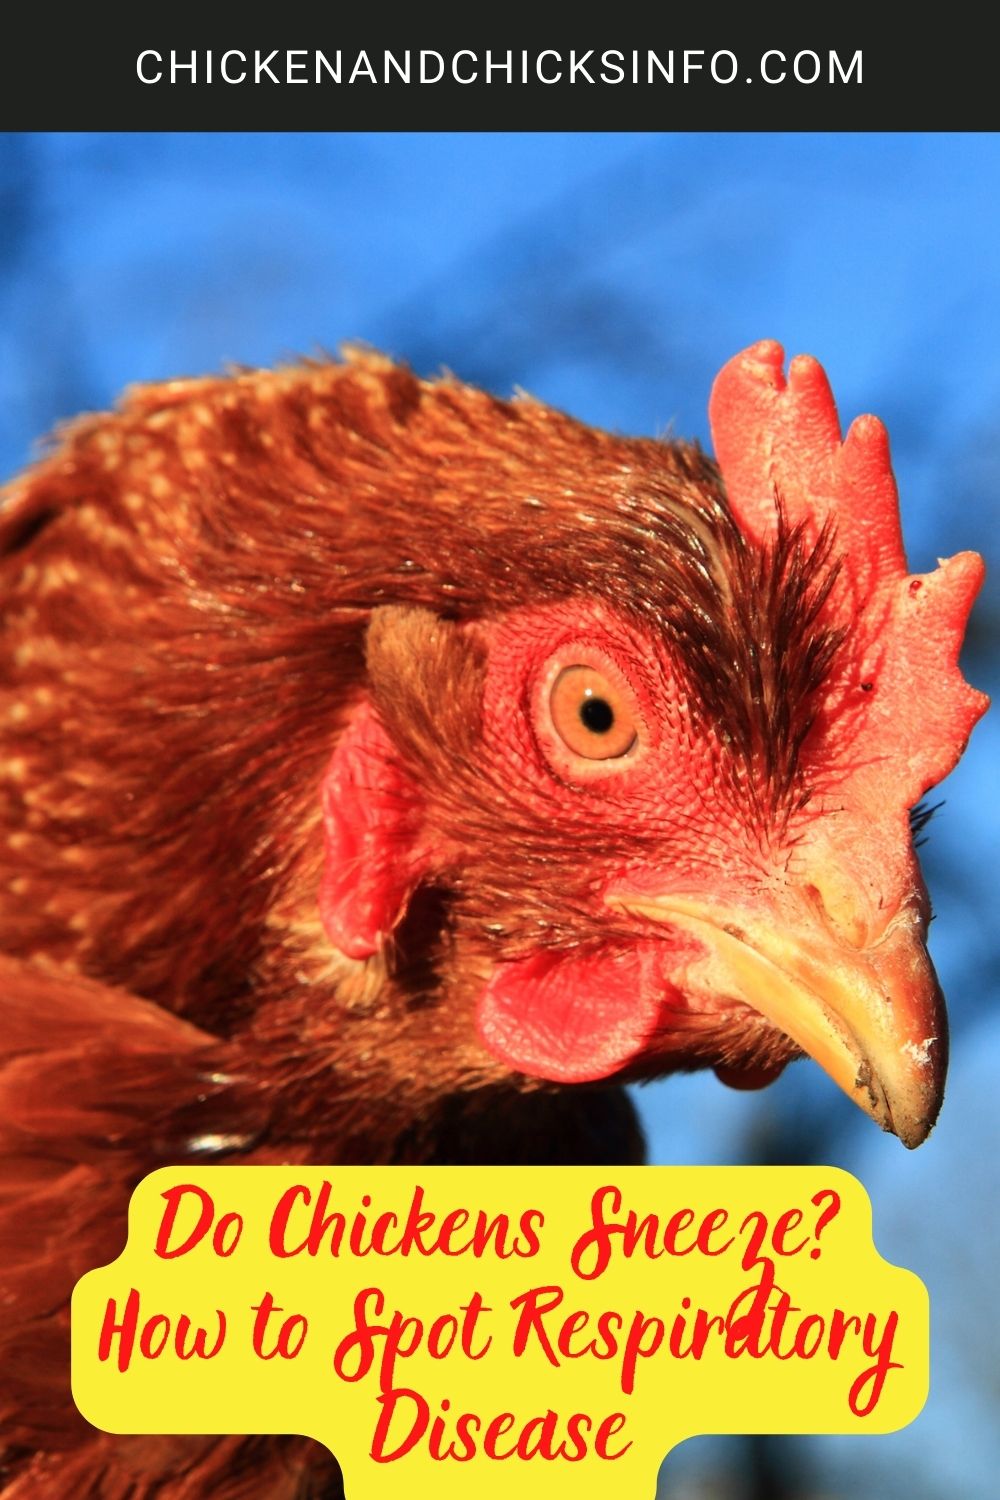 Do Chickens Sneeze? How to Spot Respiratory Disease poster.
